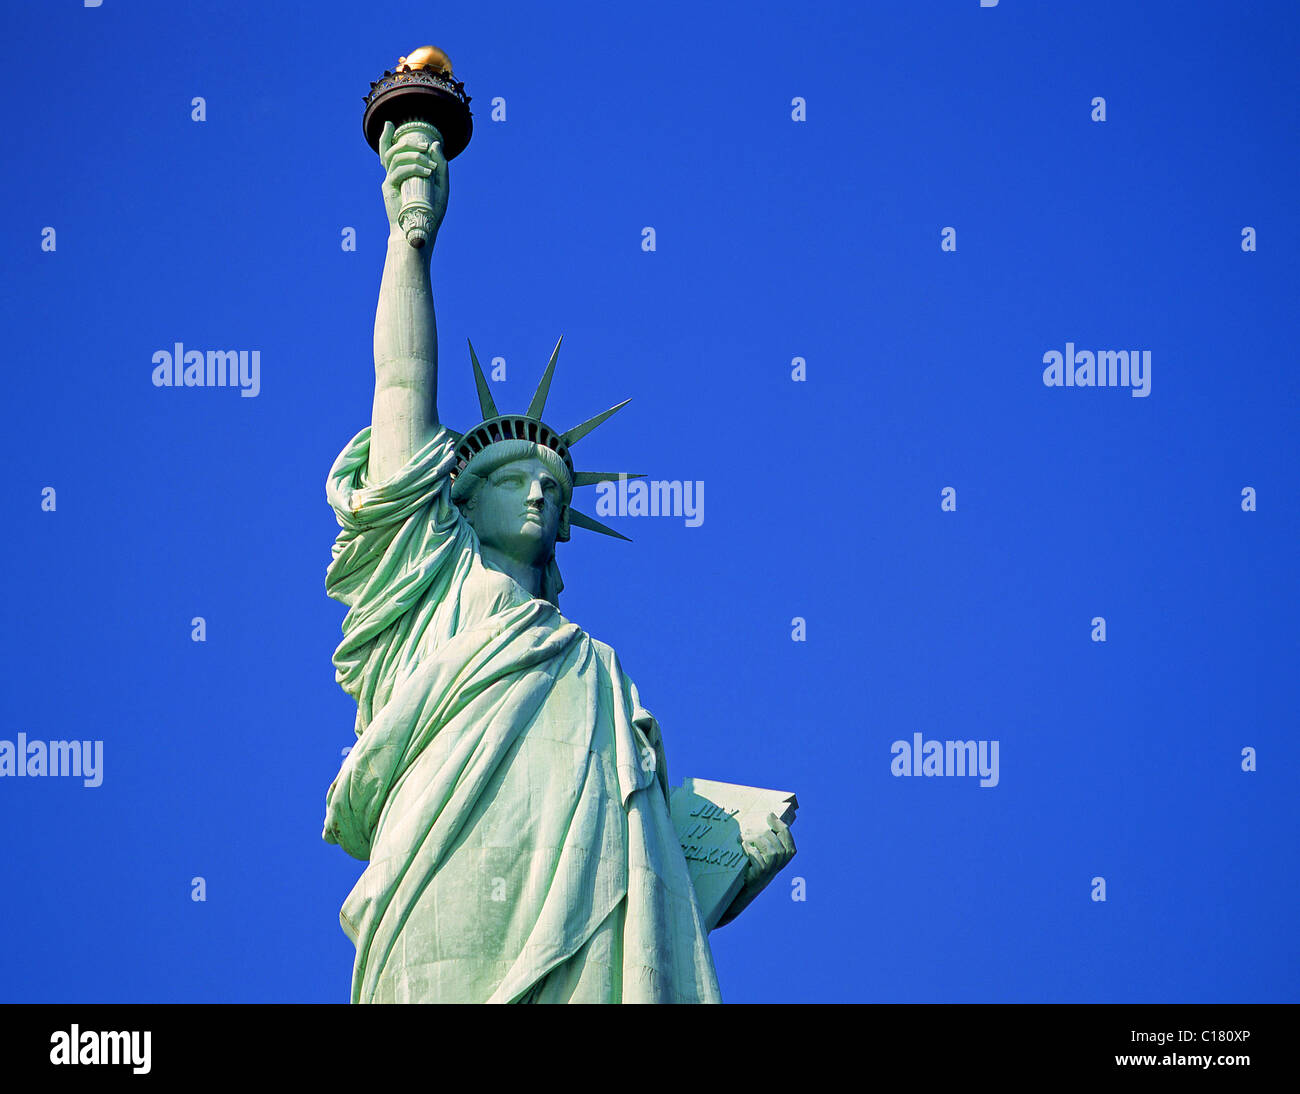 Statue of Liberty National Monument, Liberty Island, New York Harbor, New York State, United States of America Stock Photo